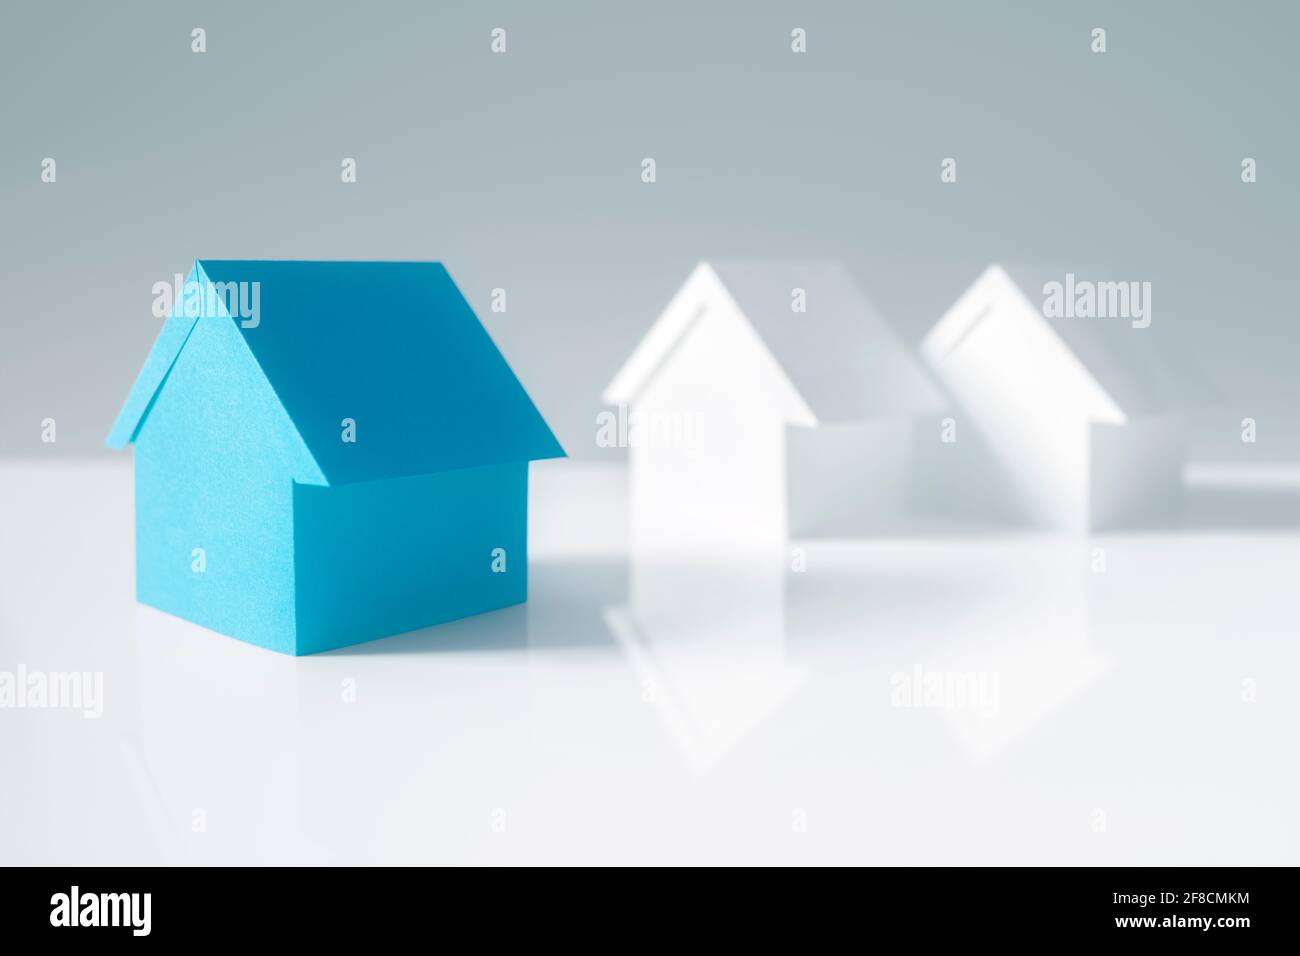 Searching for real estate property, house or new home, blue paper house standing out Stock Photo